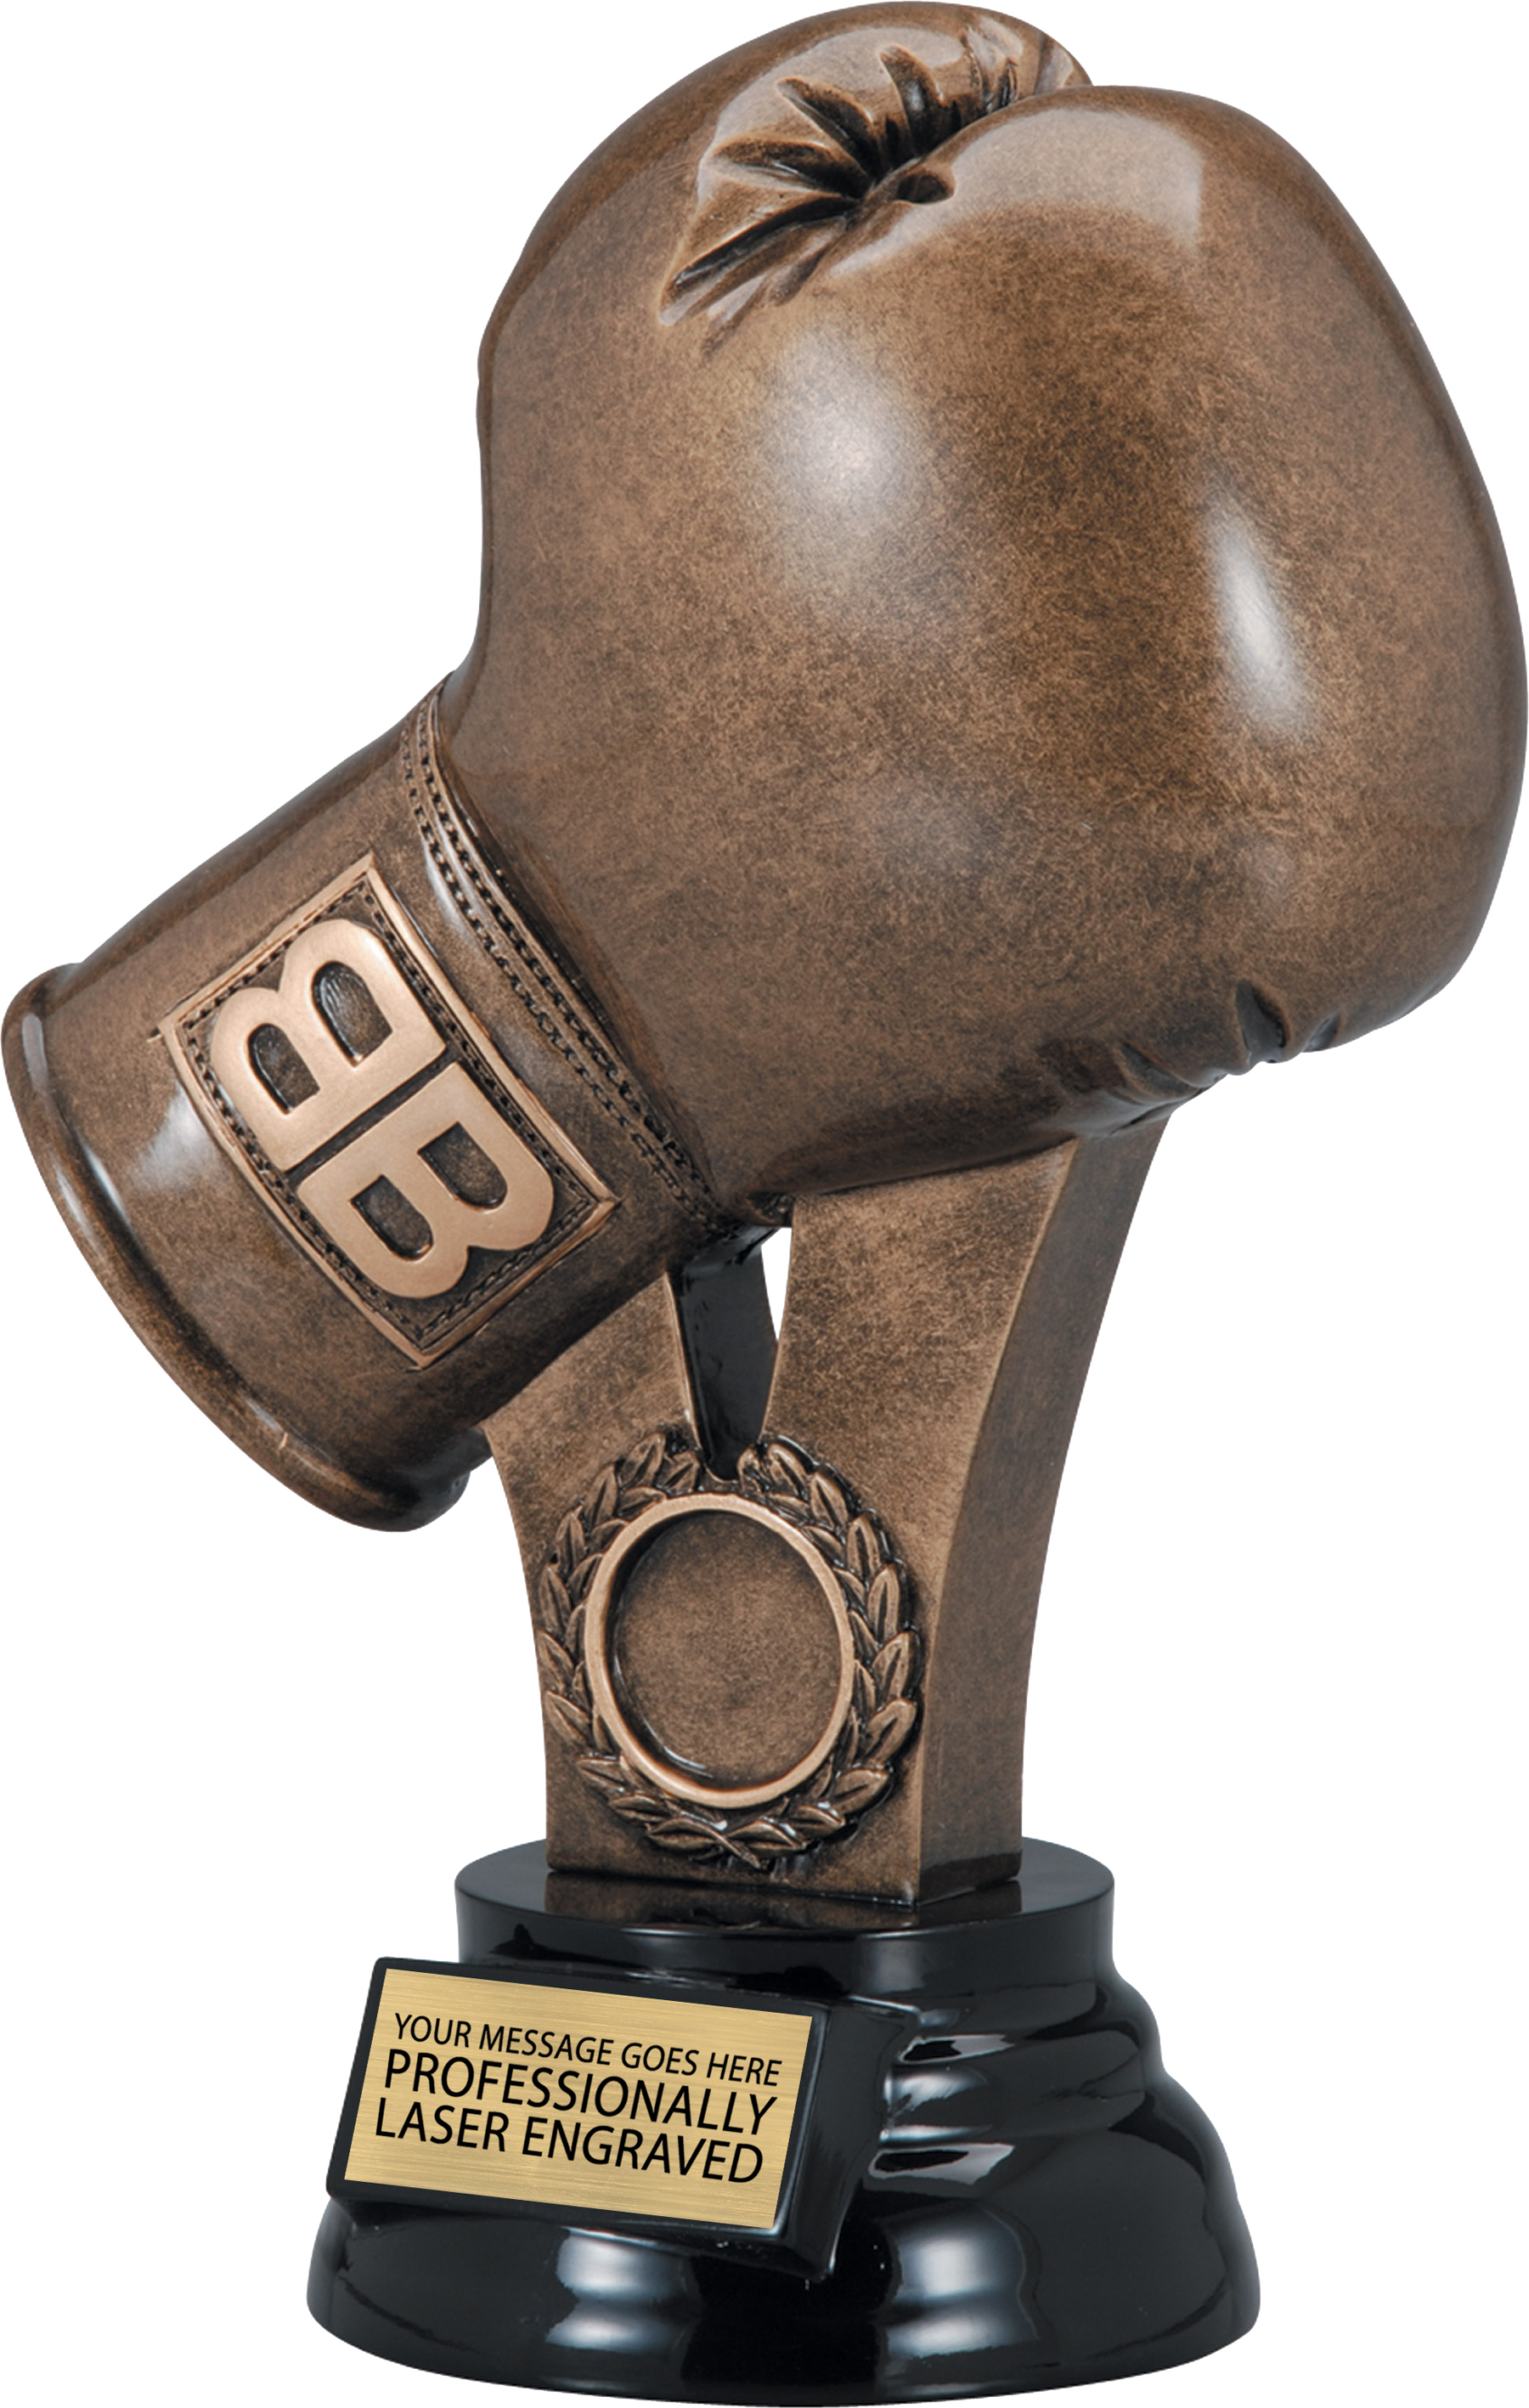 Boxing Trophies Resin Boxing Gloves Trophy Awards 2 sizes FREE Engraving 